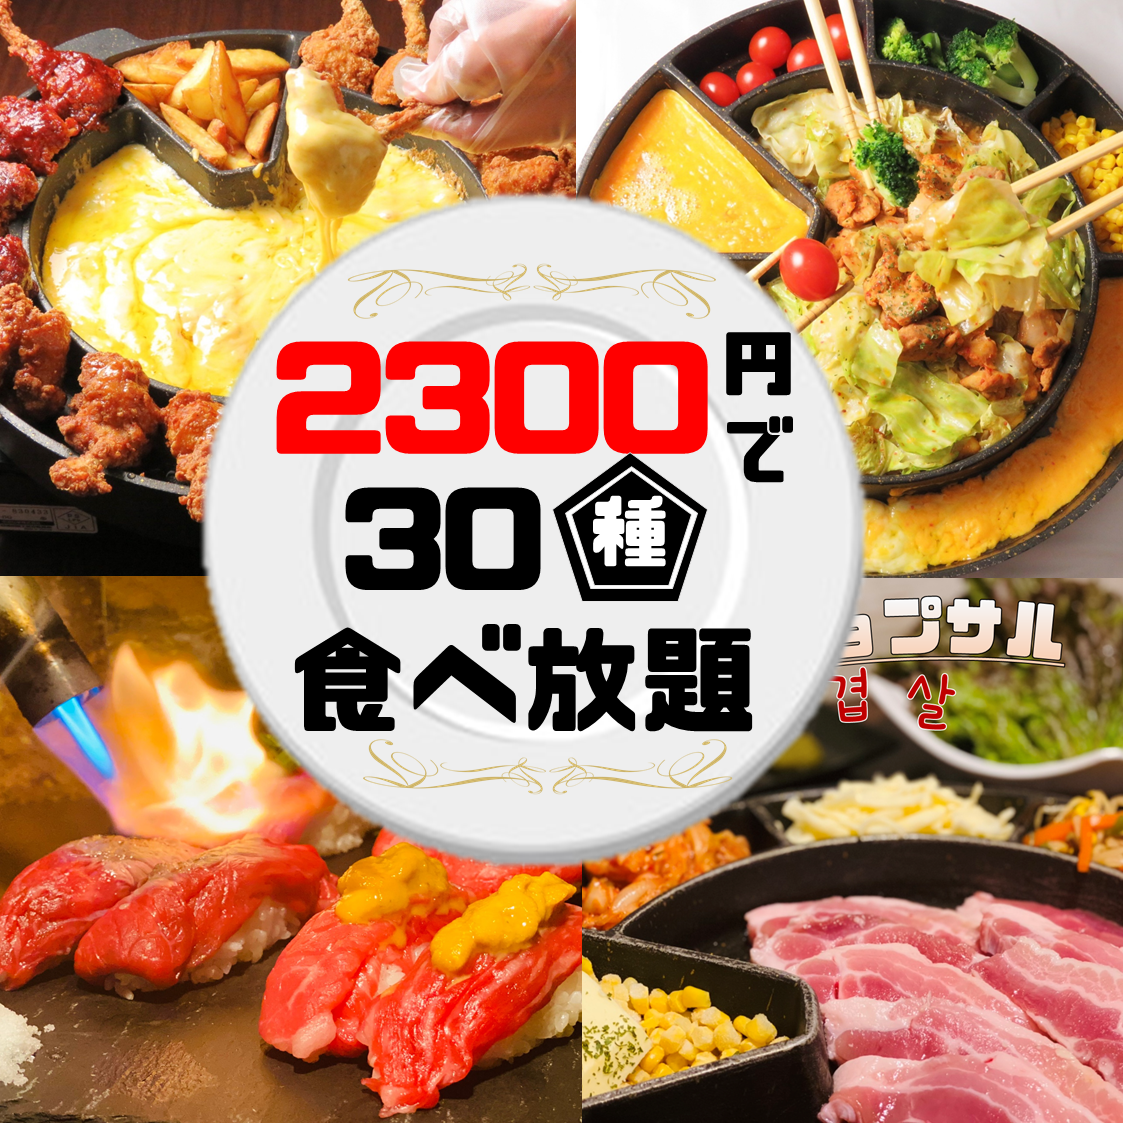 A 3-minute walk from Sendai Station! There is an all-you-can-eat and drink course for around 2,000 yen!